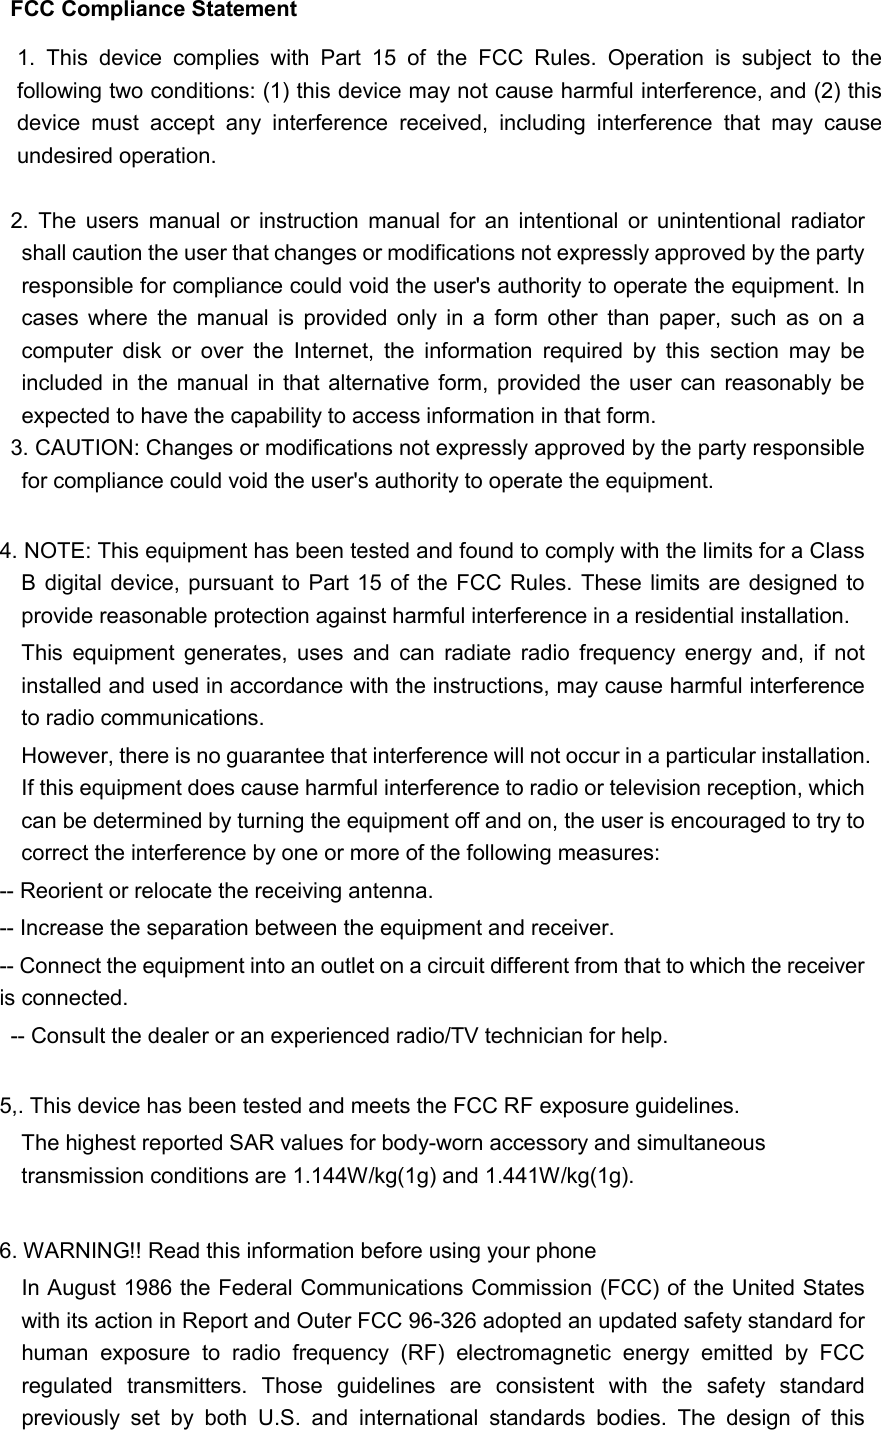 FCC Compliance Statement  2.  The  users  manual  or  instruction  manual  for  an  intentional  or  unintentional  radiator shall caution the user that changes or modifications not expressly approved by the party responsible for compliance could void the user&apos;s authority to operate the equipment. In cases  where  the  manual  is  provided  only  in  a  form  other  than  paper,  such  as  on  a computer  disk  or  over  the  Internet,  the  information  required  by  this  section  may  be included in the manual in that alternative form, provided  the  user can reasonably  be expected to have the capability to access information in that form. 3. CAUTION: Changes or modifications not expressly approved by the party responsible for compliance could void the user&apos;s authority to operate the equipment.  4. NOTE: This equipment has been tested and found to comply with the limits for a Class B digital device,  pursuant to  Part 15 of the FCC Rules. These  limits are designed to provide reasonable protection against harmful interference in a residential installation.   This  equipment  generates,  uses  and  can  radiate  radio  frequency  energy  and,  if  not installed and used in accordance with the instructions, may cause harmful interference to radio communications. However, there is no guarantee that interference will not occur in a particular installation. If this equipment does cause harmful interference to radio or television reception, which can be determined by turning the equipment off and on, the user is encouraged to try to correct the interference by one or more of the following measures:   -- Reorient or relocate the receiving antenna.   -- Increase the separation between the equipment and receiver.   -- Connect the equipment into an outlet on a circuit different from that to which the receiver is connected.   -- Consult the dealer or an experienced radio/TV technician for help.  5,. This device has been tested and meets the FCC RF exposure guidelines. The highest reported SAR values for body-worn accessory and simultaneous transmission conditions are 1.144W/kg(1g) and 1.441W/kg(1g).  6. WARNING!! Read this information before using your phone In August 1986 the Federal Communications Commission (FCC) of the United States with its action in Report and Outer FCC 96-326 adopted an updated safety standard for human  exposure  to  radio  frequency  (RF)  electromagnetic  energy  emitted  by  FCC regulated  transmitters.  Those  guidelines  are  consistent  with  the  safety  standard previously  set  by  both  U.S.  and  international  standards  bodies.  The  design  of  this 1.  This  device  complies  with  Part  15  of  the  FCC  Rules.  Operation  is  subject  to  the following two conditions: (1) this device may not cause harmful interference, and (2) this device  must  accept  any  interference  received,  including  interference  that  may  cause undesired operation. 